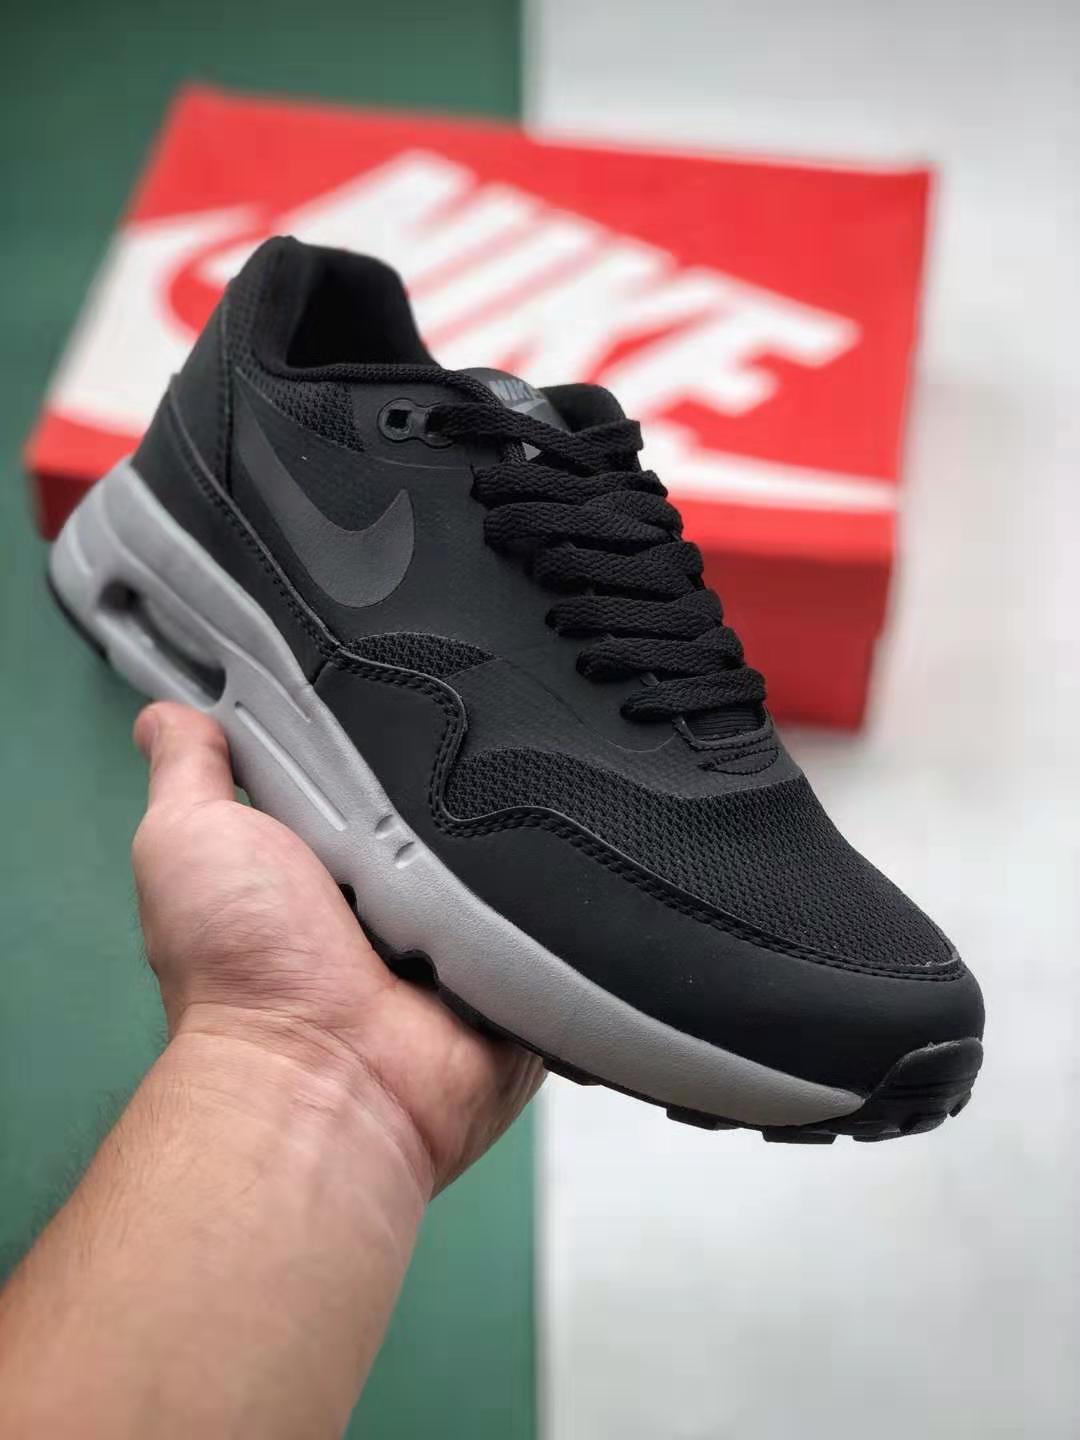 Nike Air Max 1 Ultra 2.0 Essential 'Black Grey' 875679-002 - Shop the Classic Design and Comfort of Nike Air Max 1 Ultra 2.0 Essential Sneakers!